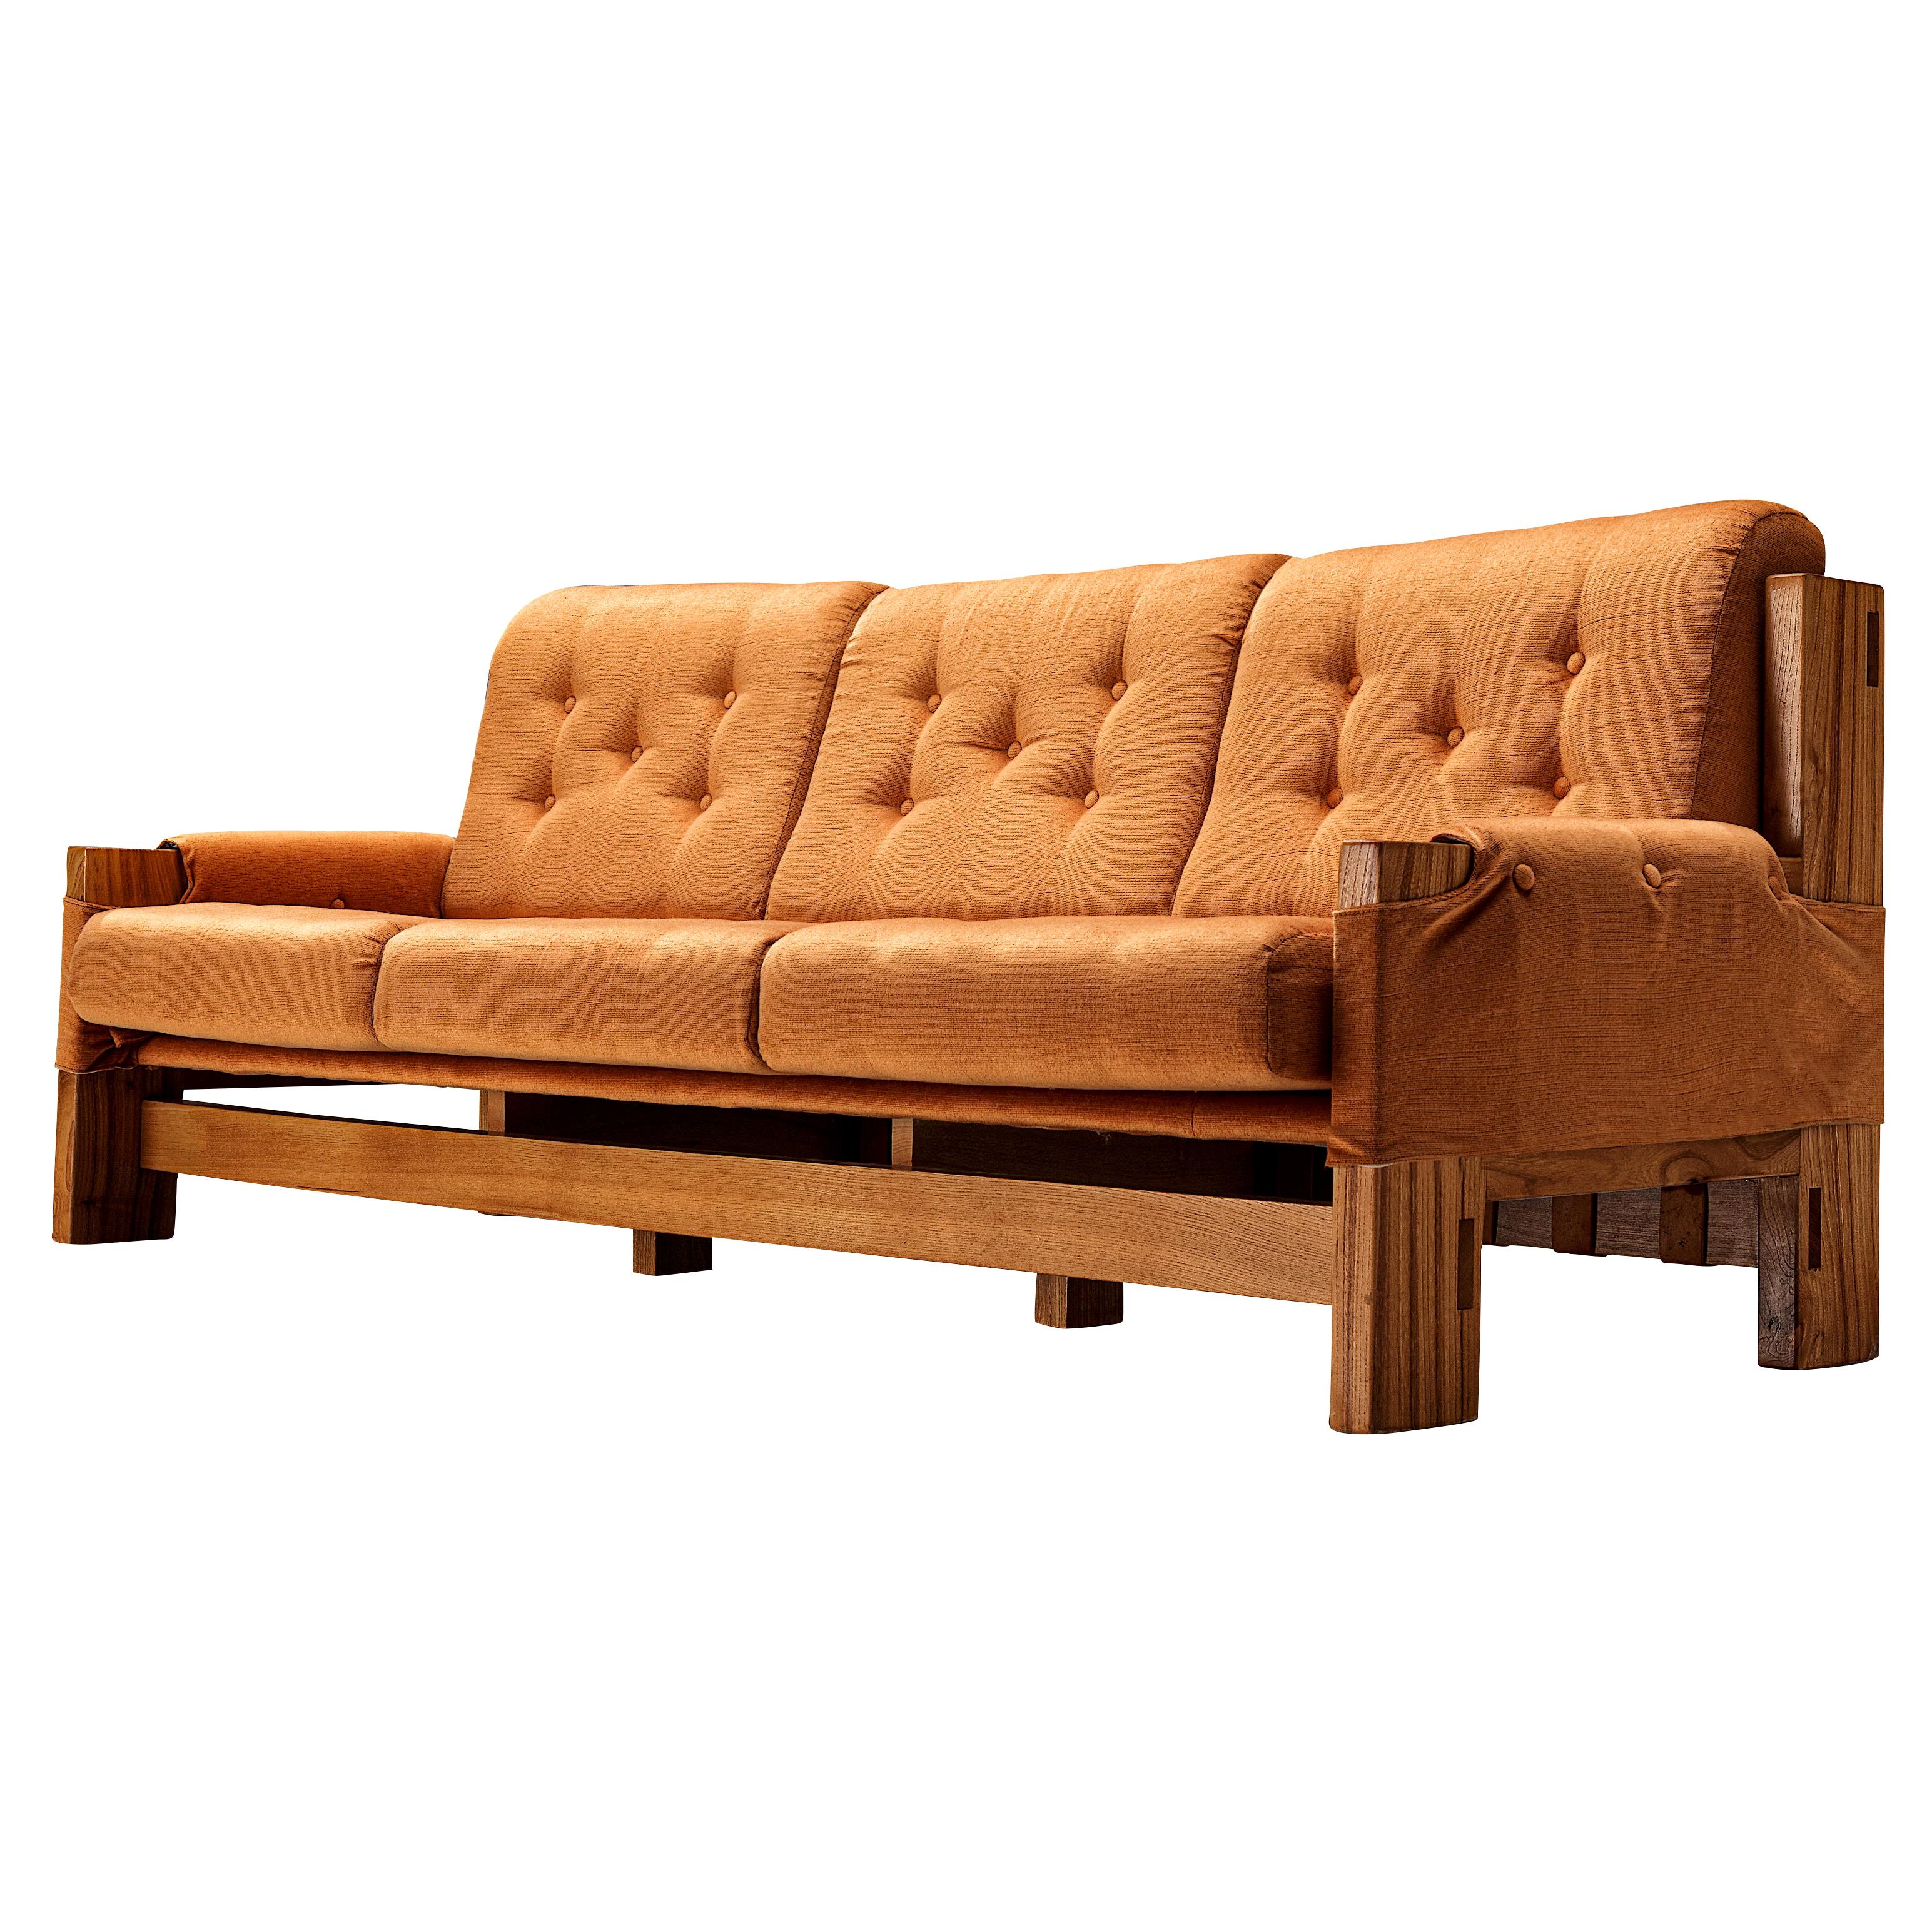 Maison Regain Sofa in Elm and Orange Fabric Upholstery For Sale at 1stDibs